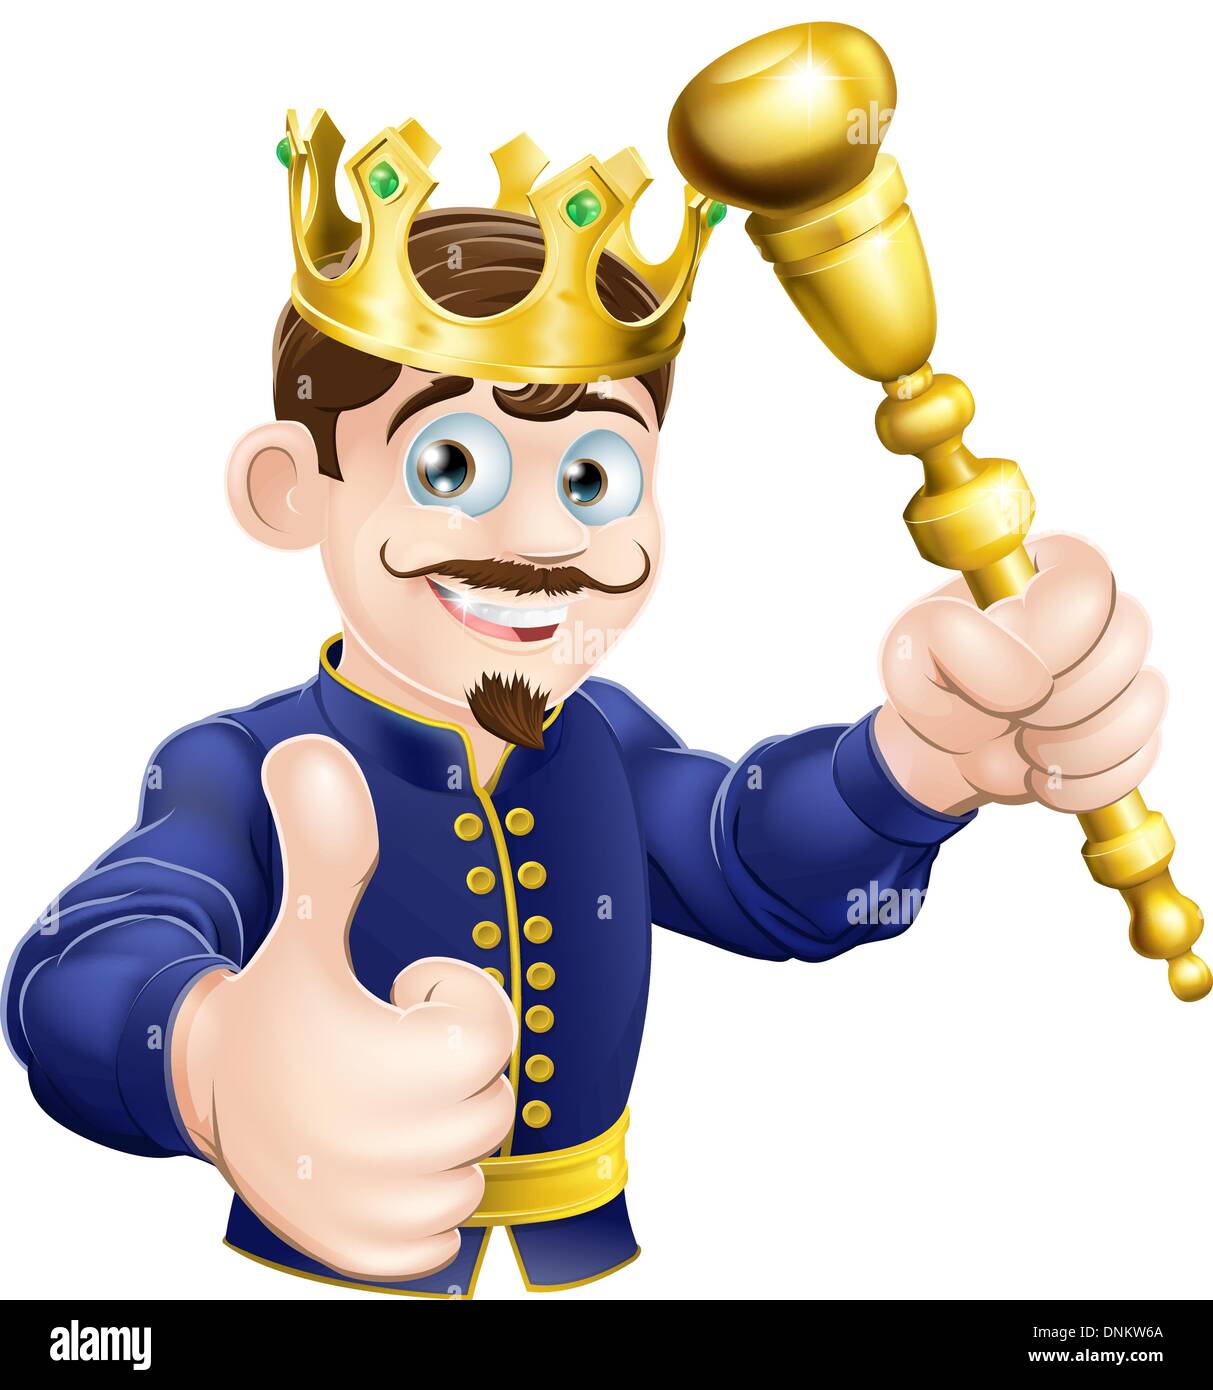 Illustration of a happy cartoon king holding a gold sceptre Stock Vector